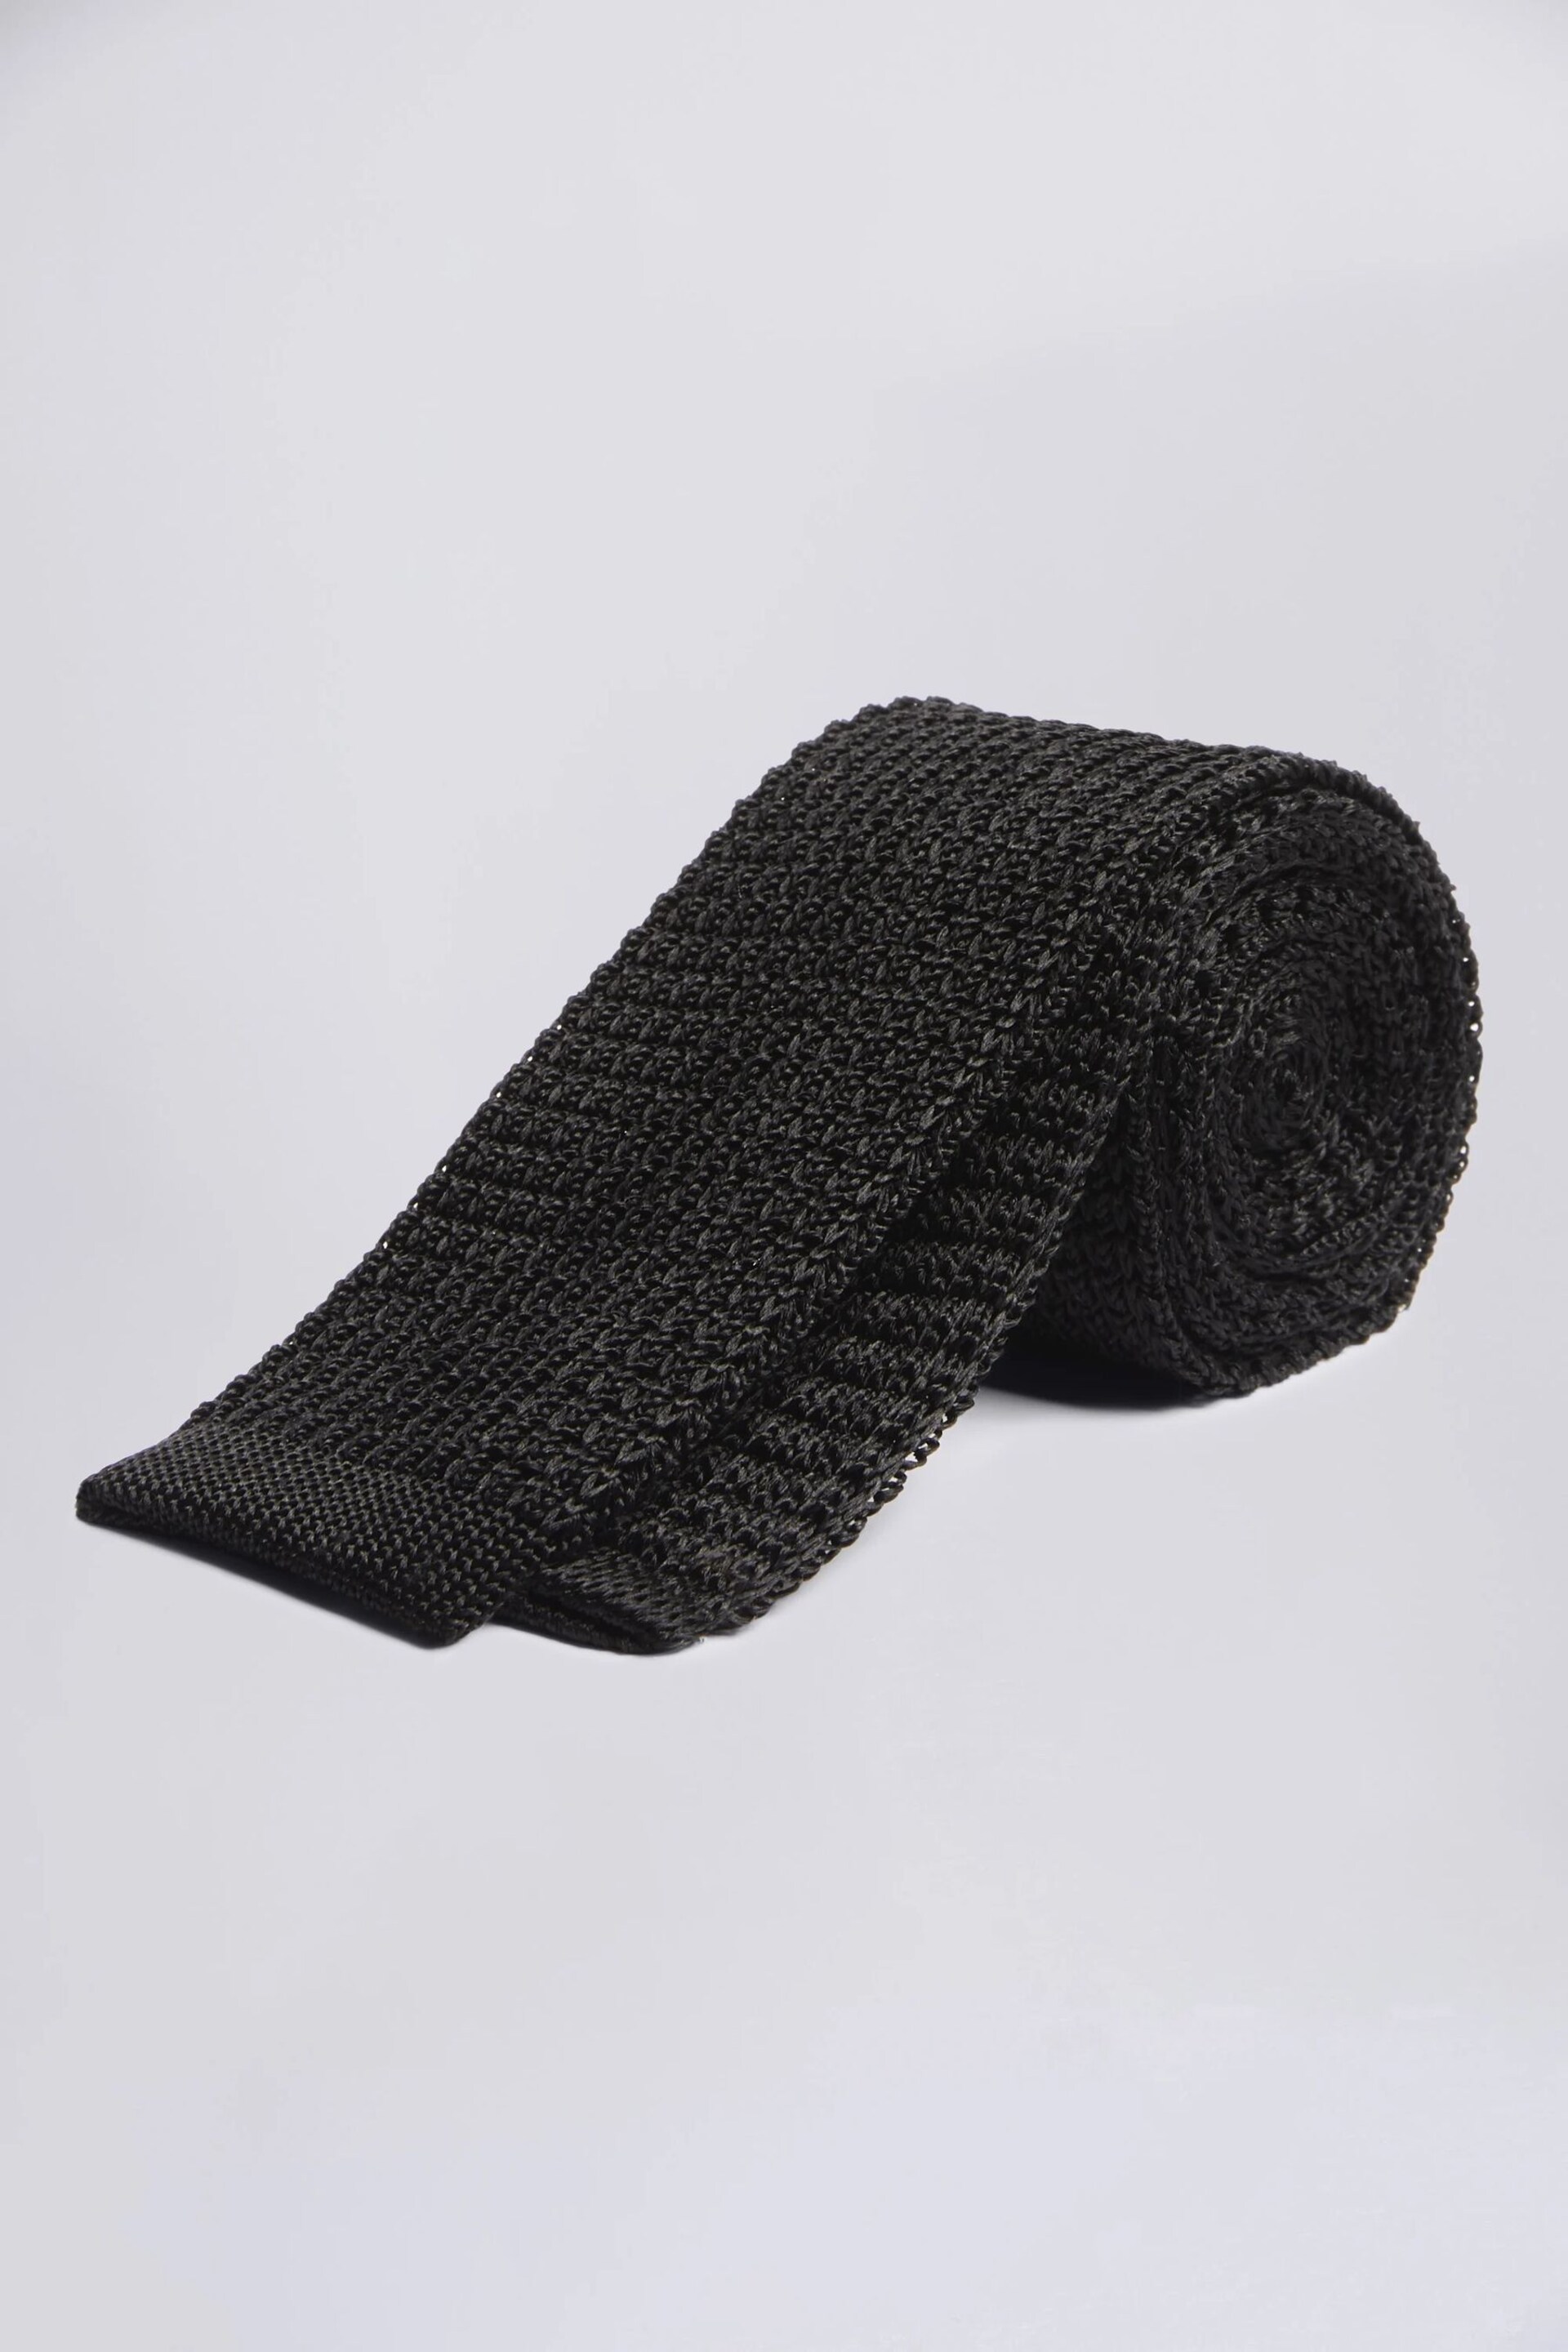 MOSS Black Knitted Silk Tie - Image 1 of 2